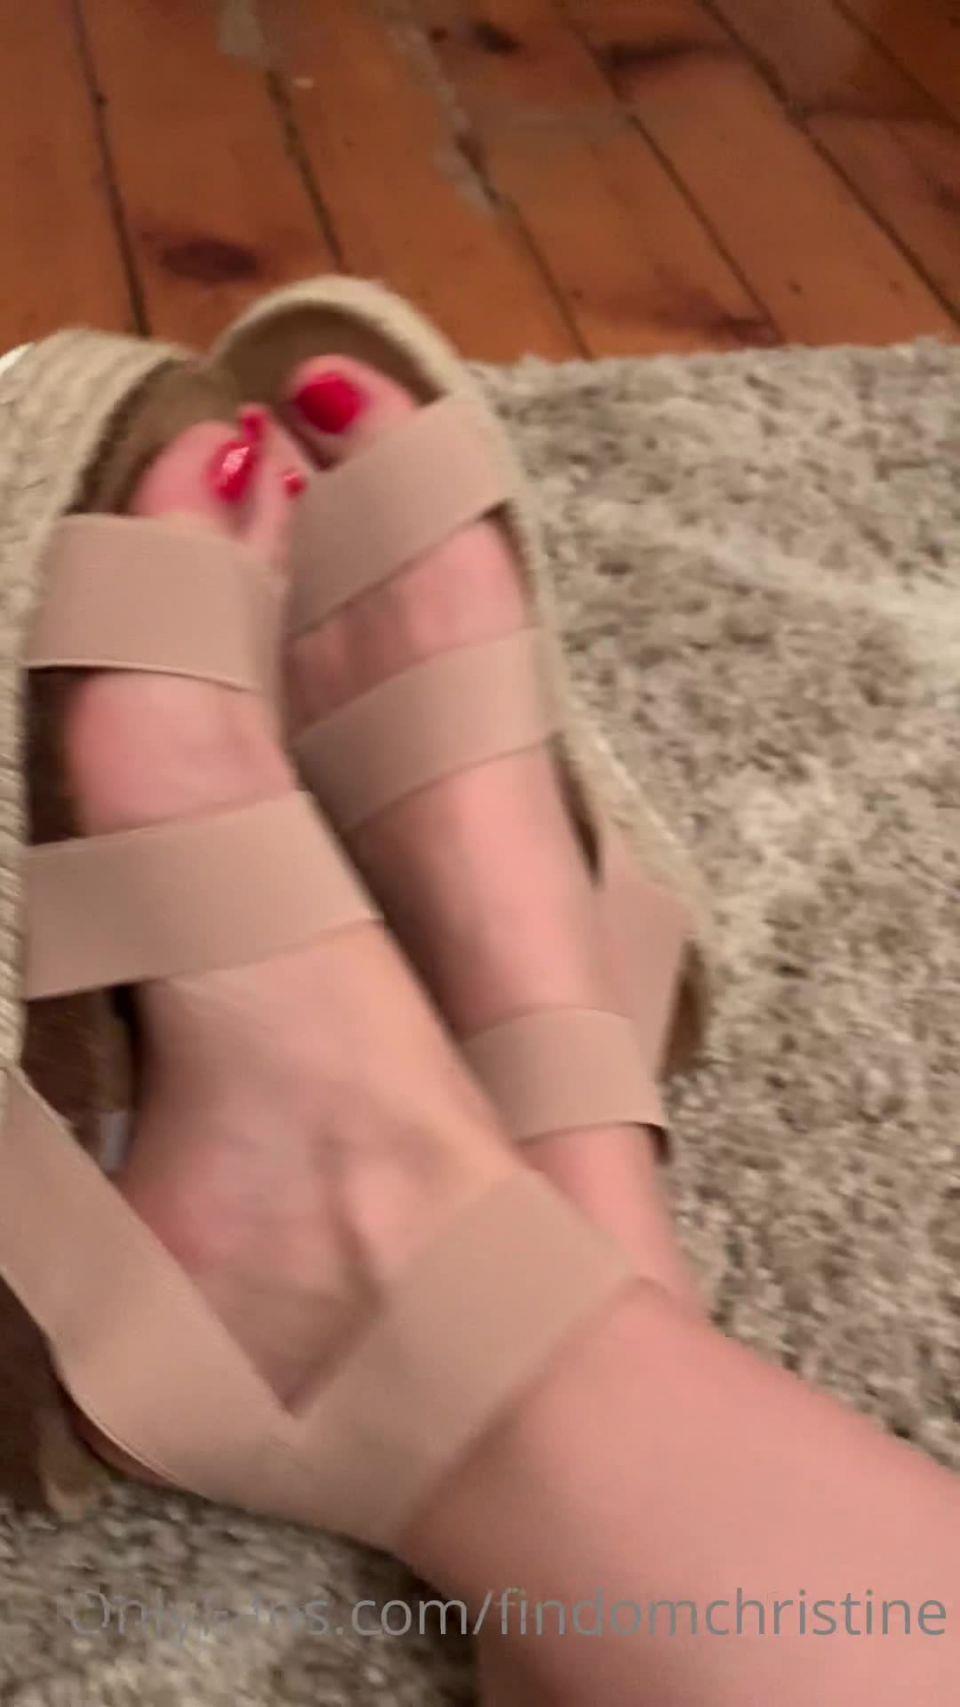 findomchristine 20-05-2020 More sandals arriving from my wishlist